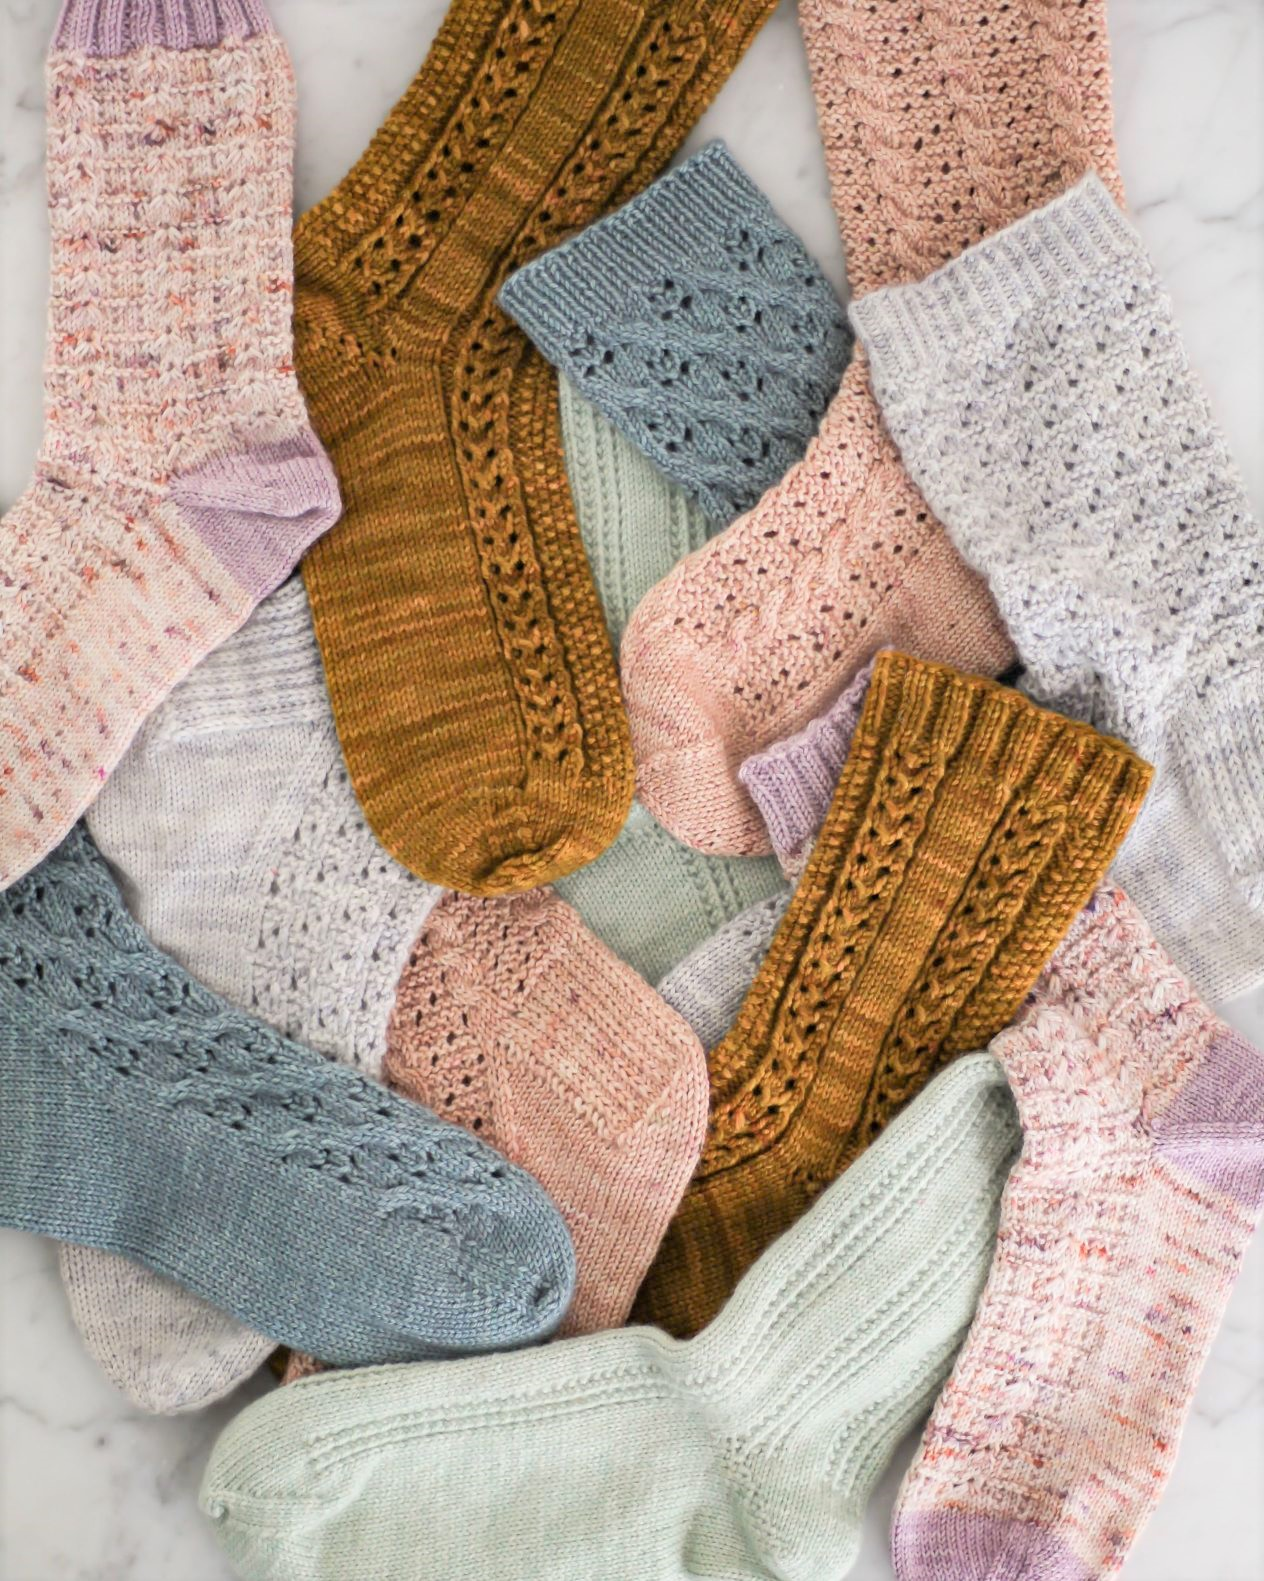 A pile of pastel handknit socks all laid out on a flat surface. There are pink, blue, light green, and caramel-colored socks jumbled up together.